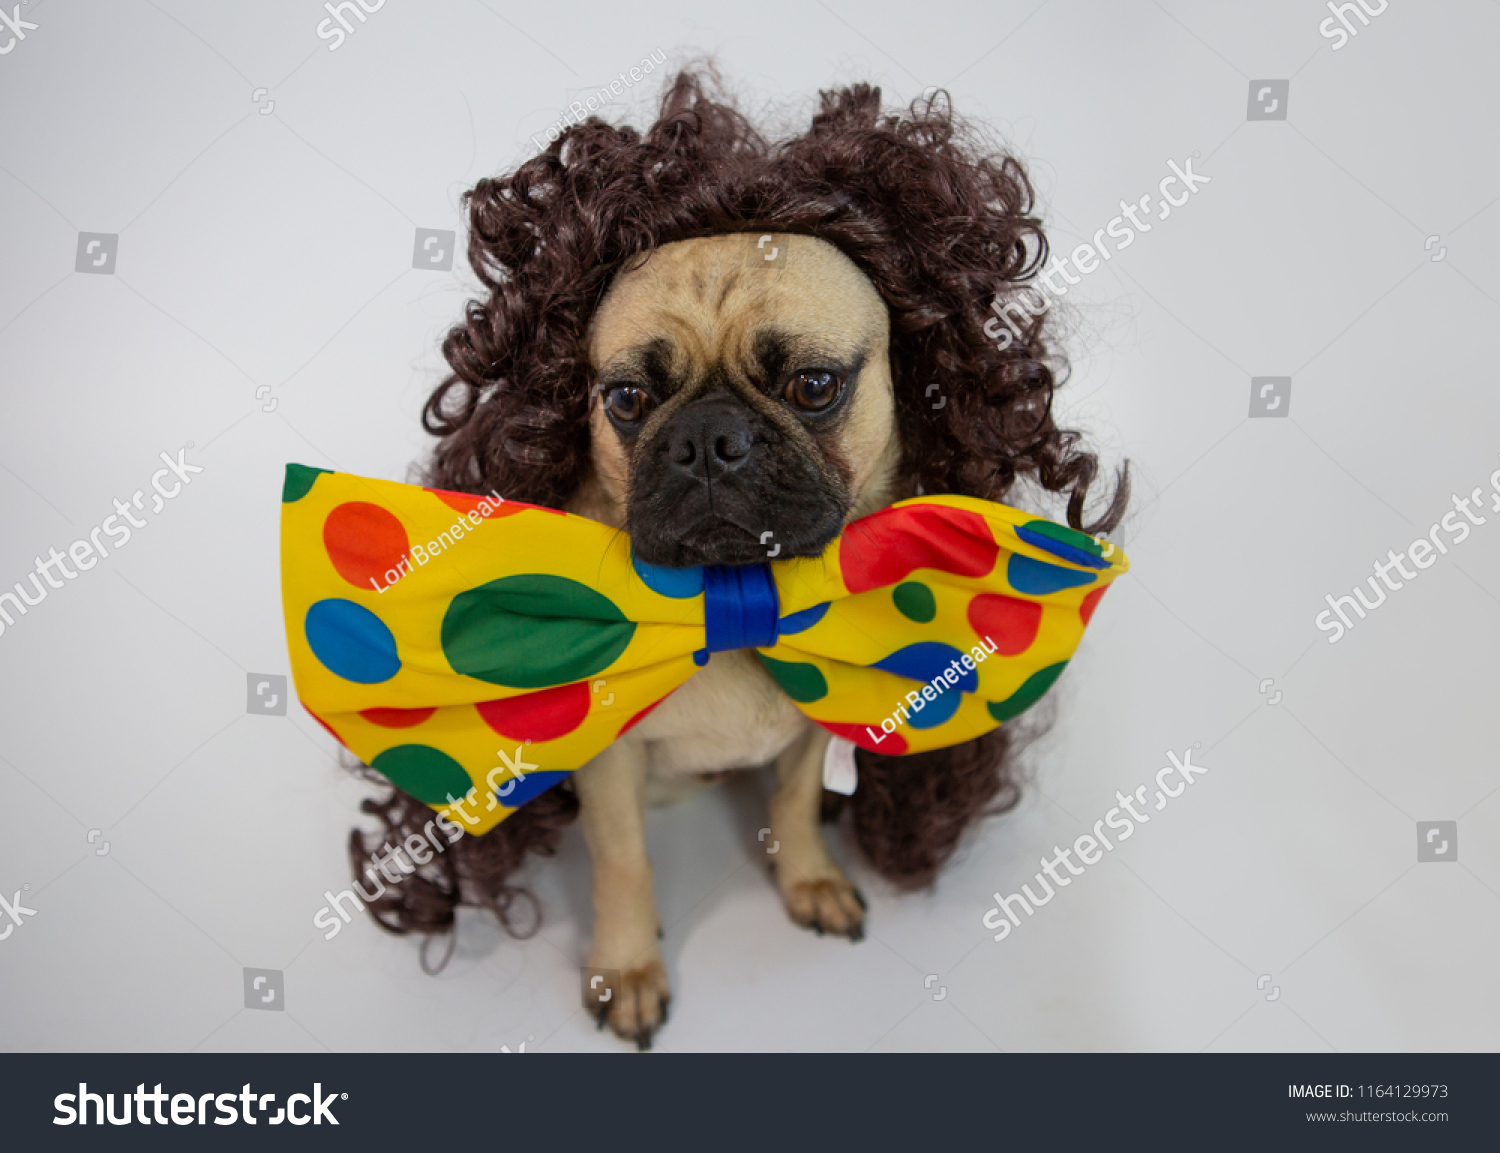 curly haired pug